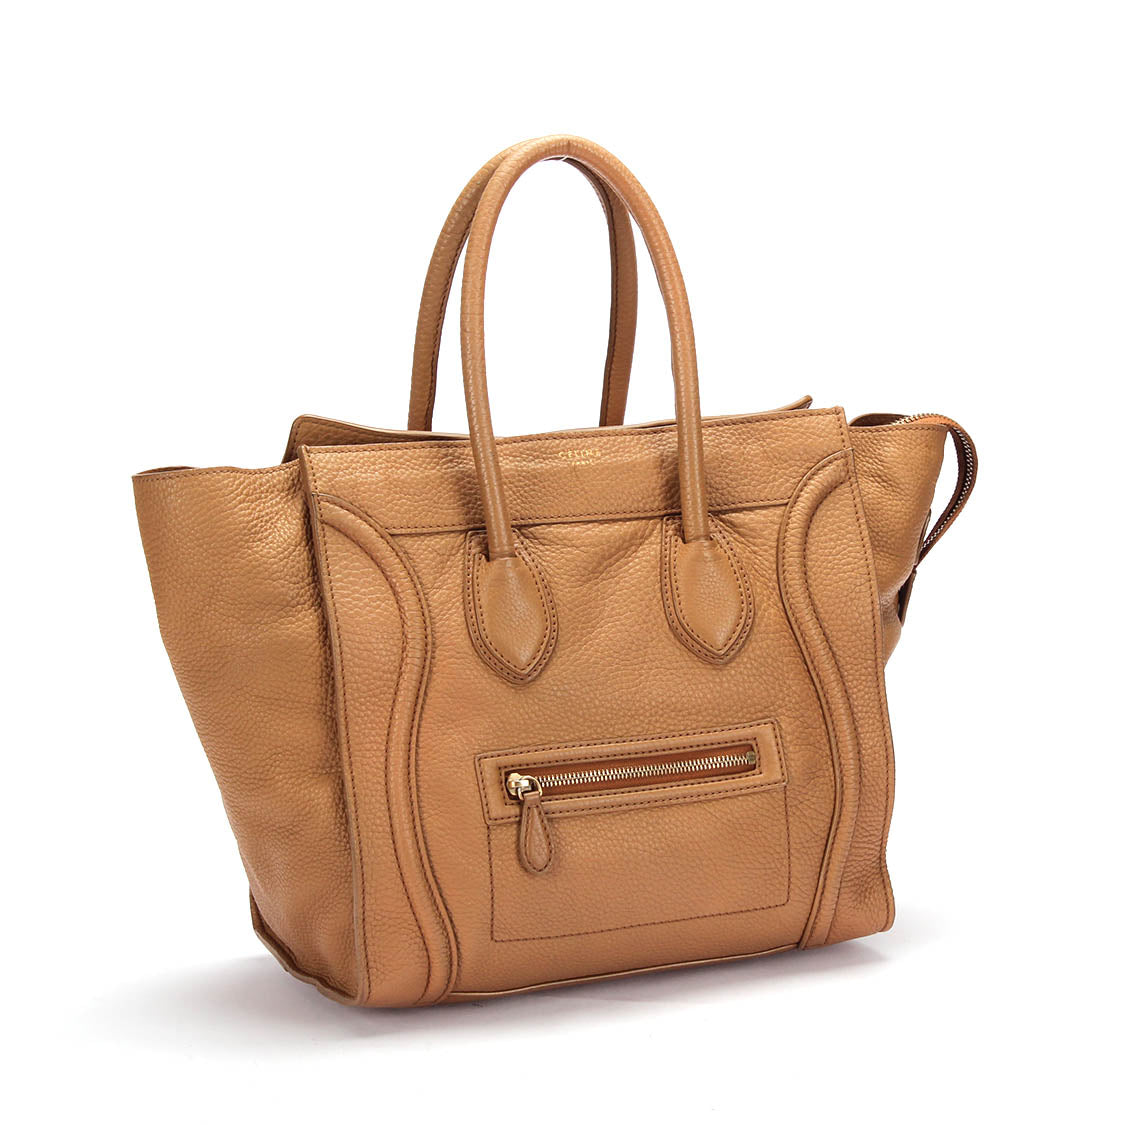 Luggage Leather Tote Bag